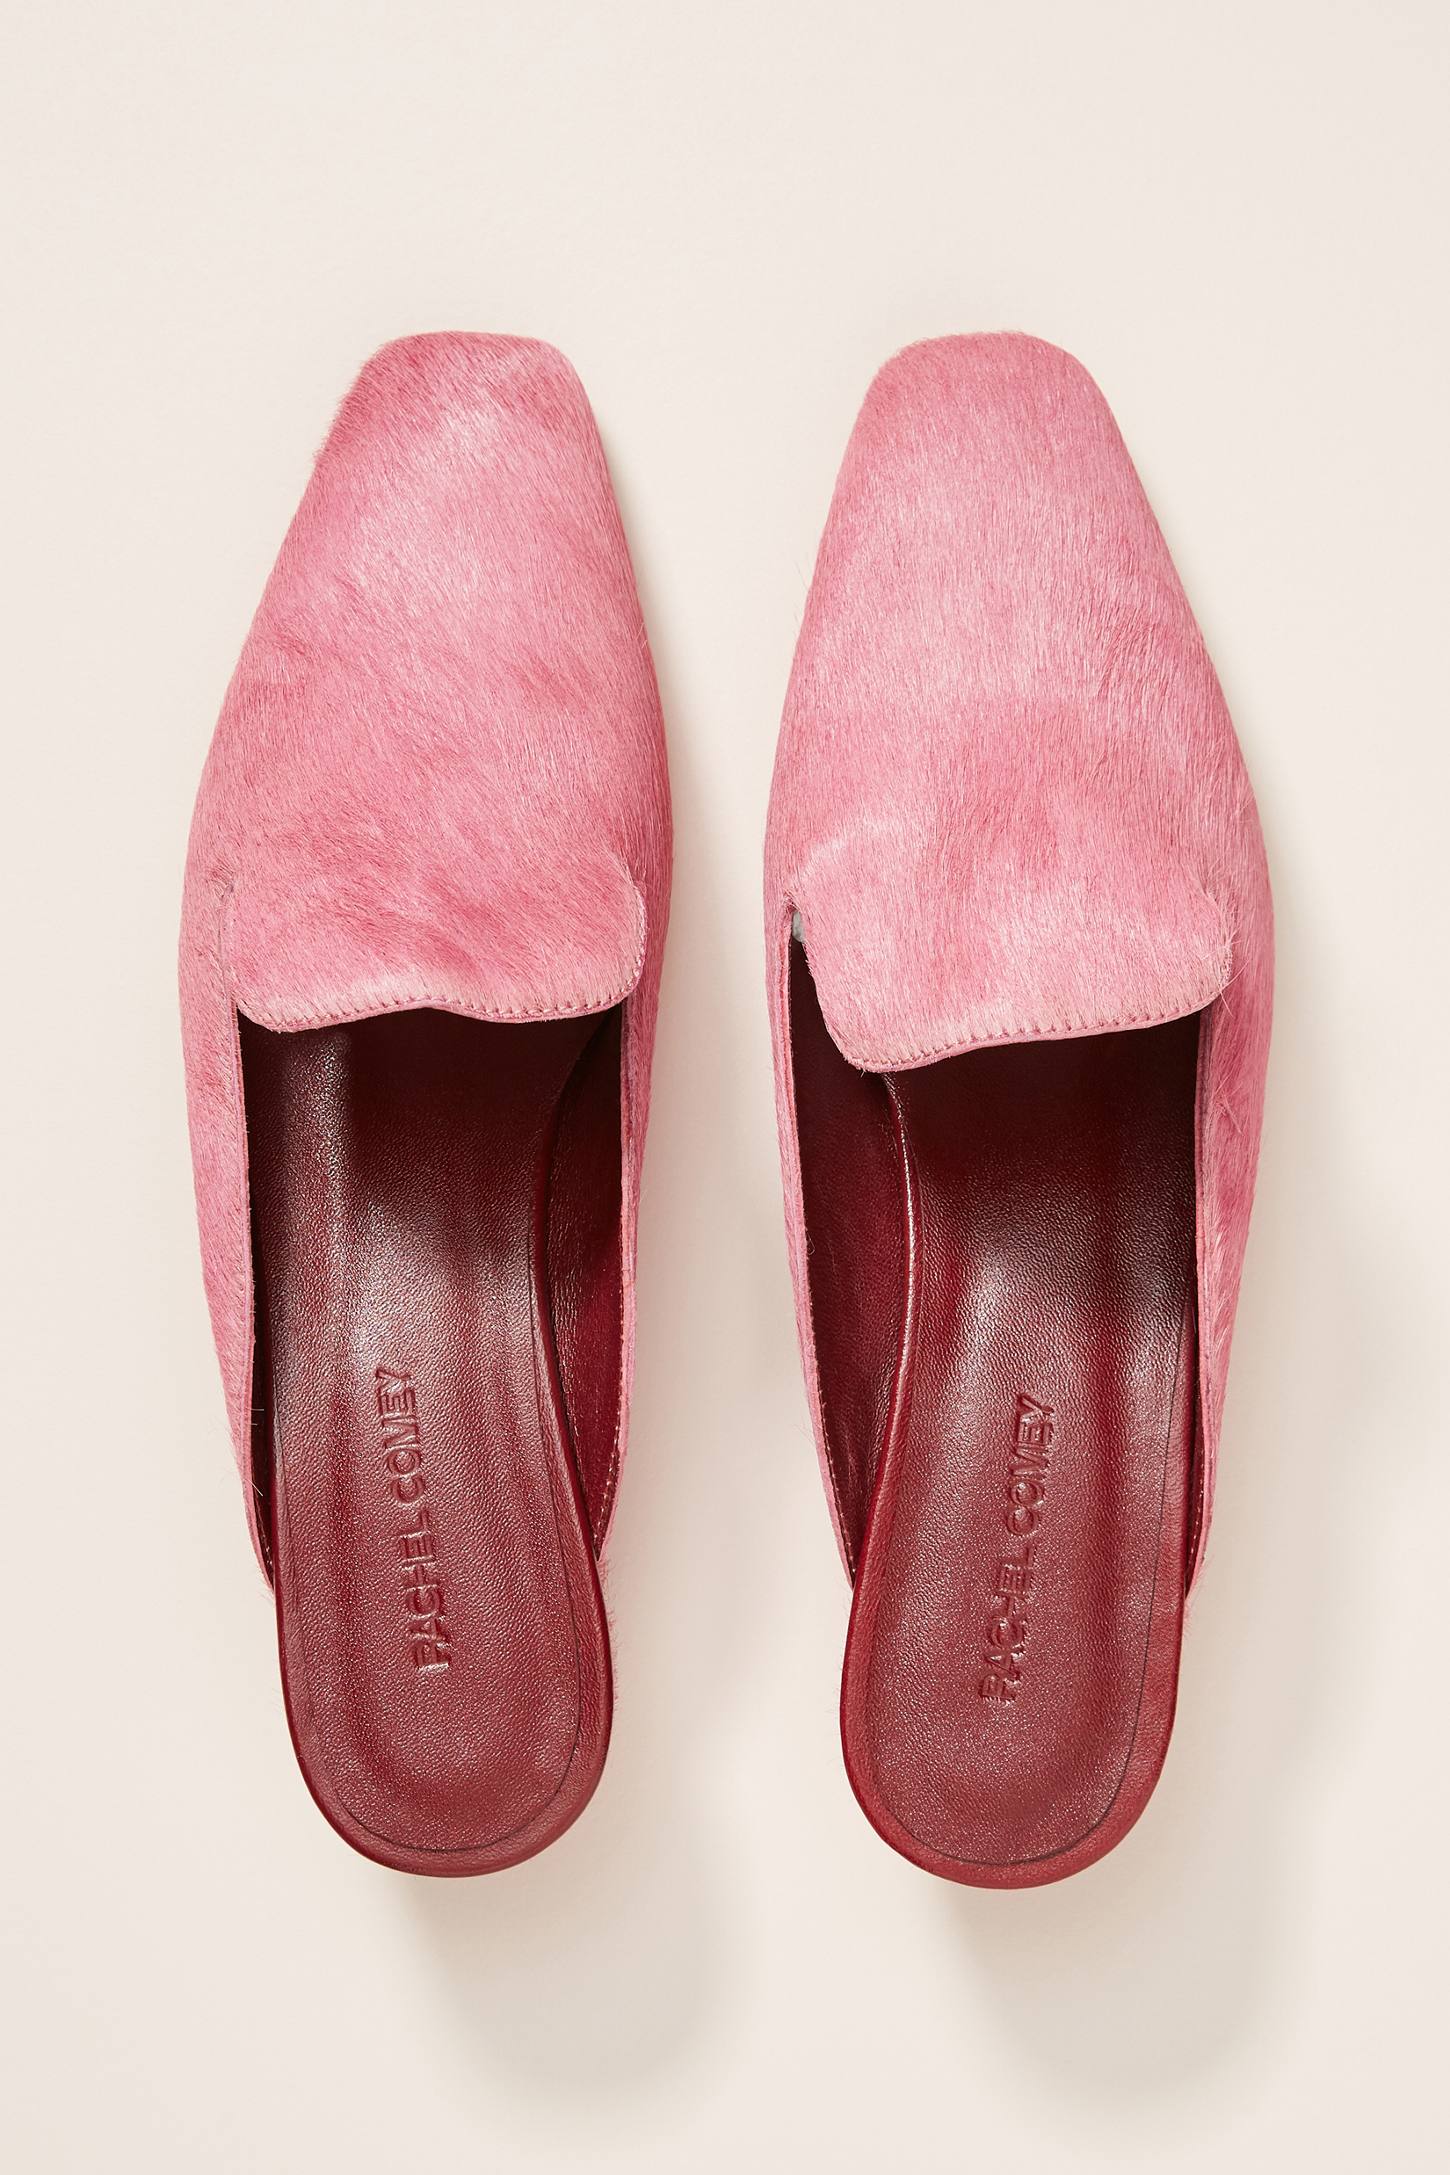 pink-calf-hair-wedge-slides-loafers-mules